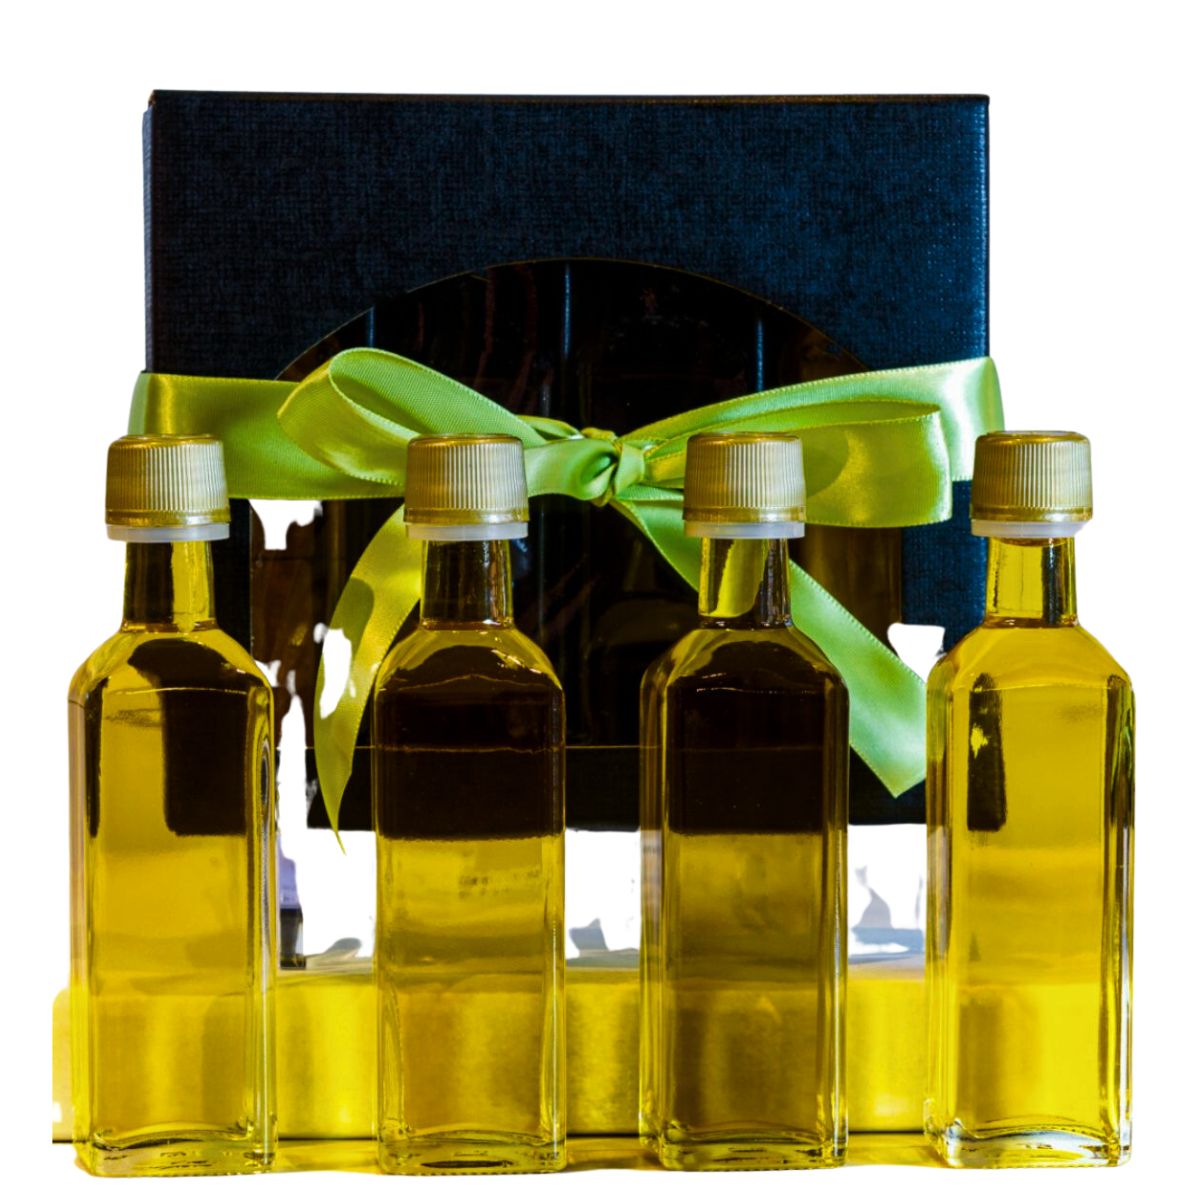 Gourmet Olive Oil Sample Gift Set- An assortment of our bestselling olives oils